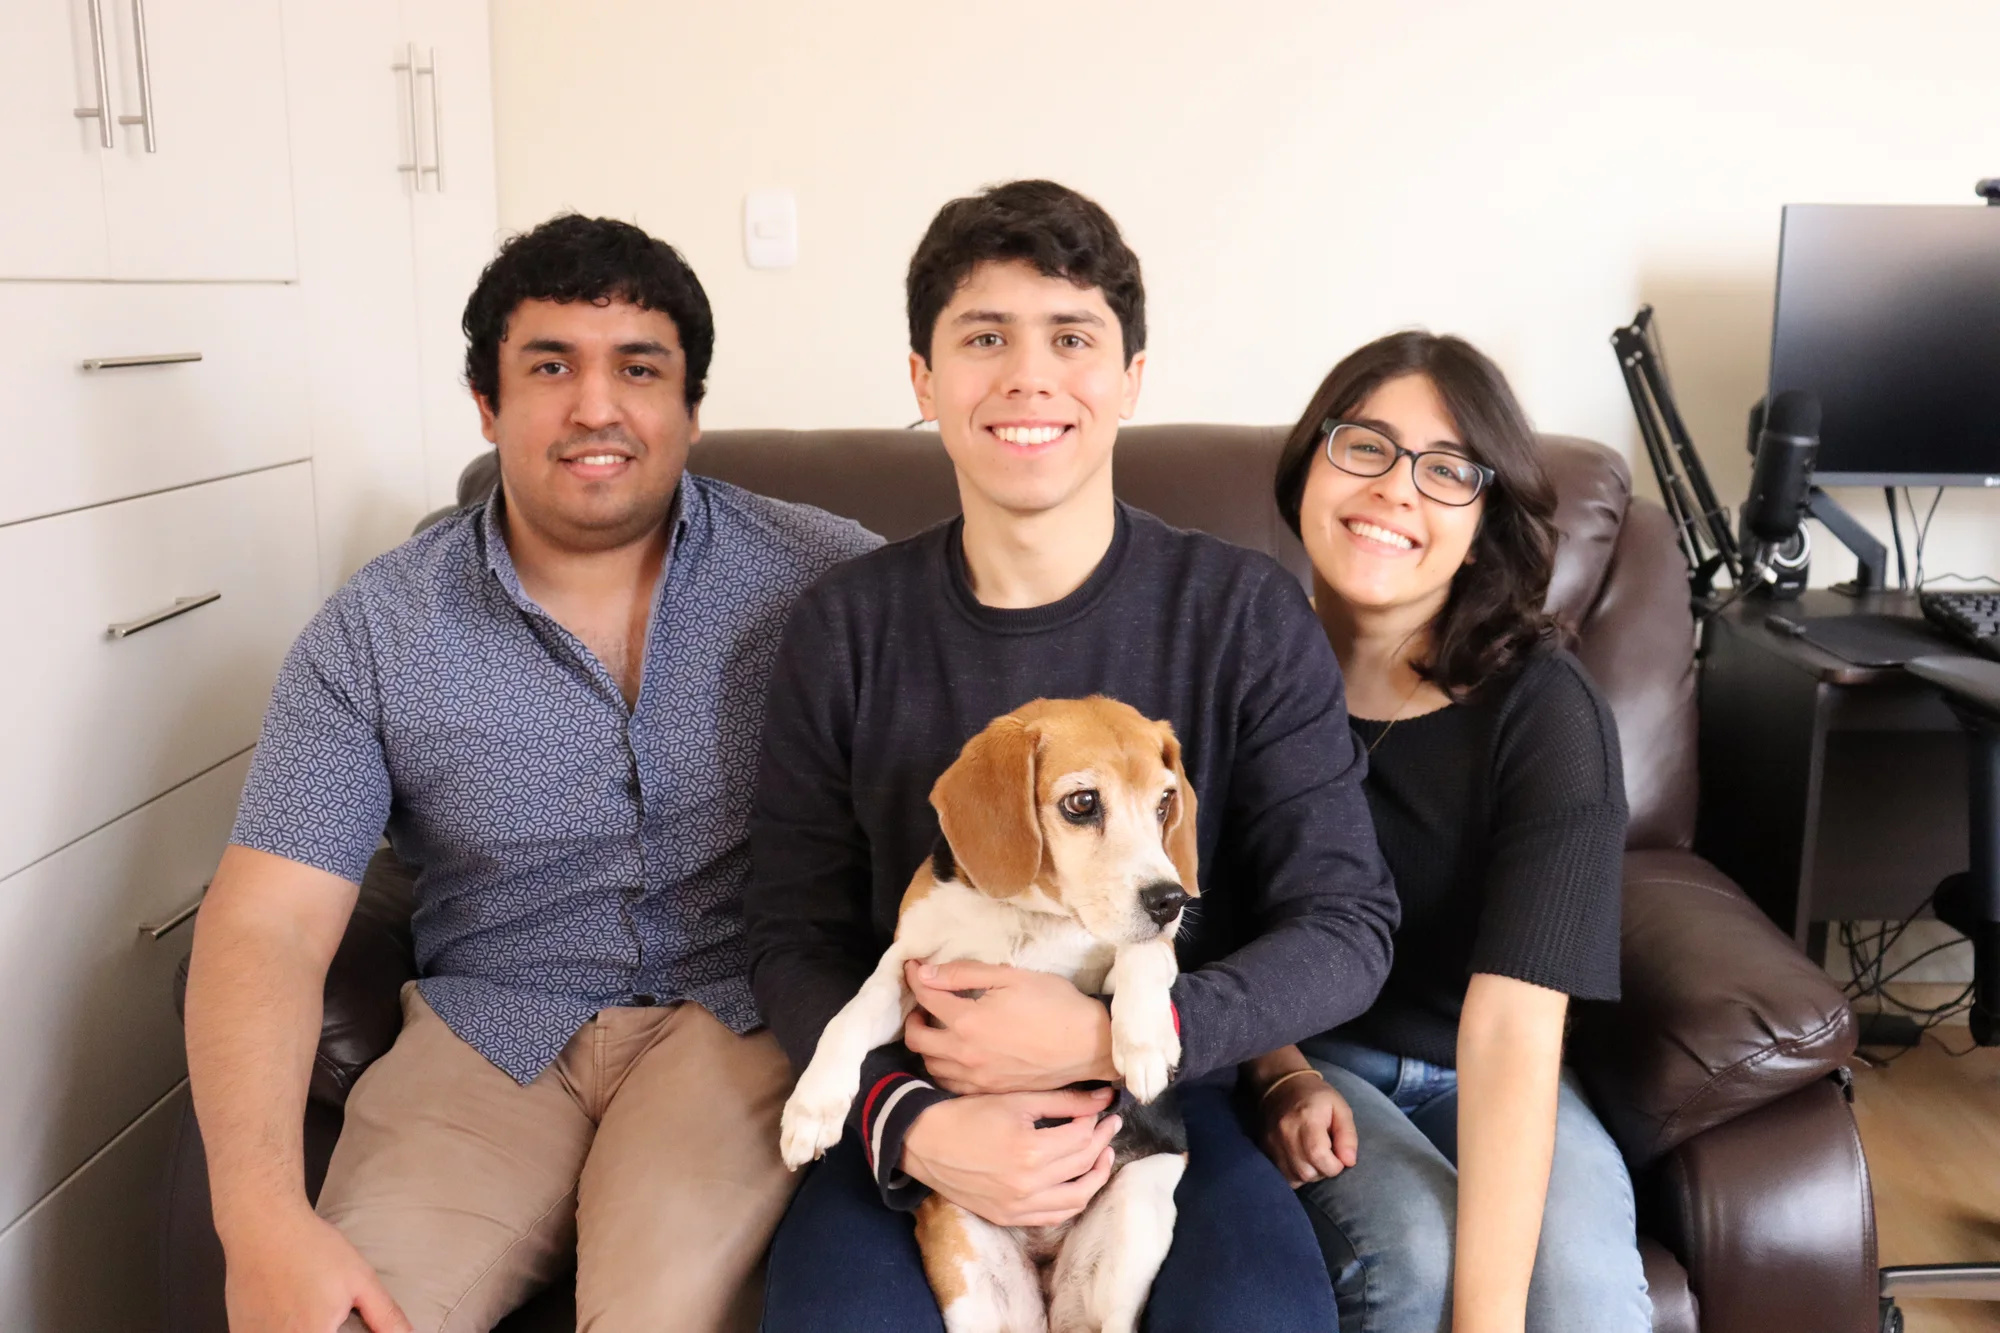 Three people sit together with a beagle in their lap.